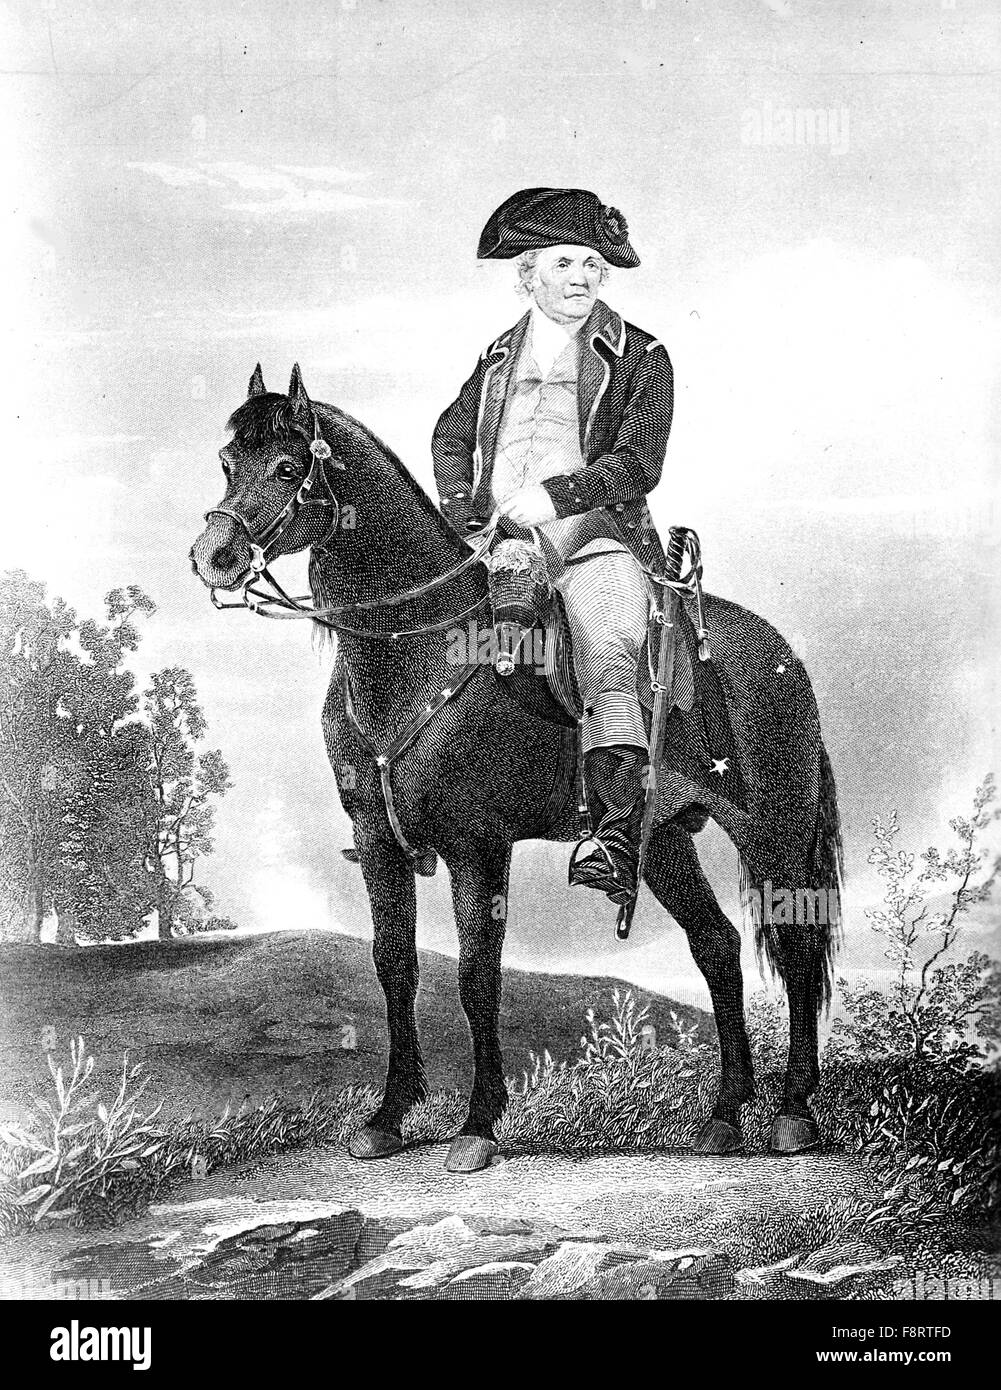 ISRAEL PUTNAM (1718-1790) American army officer Stock Photo